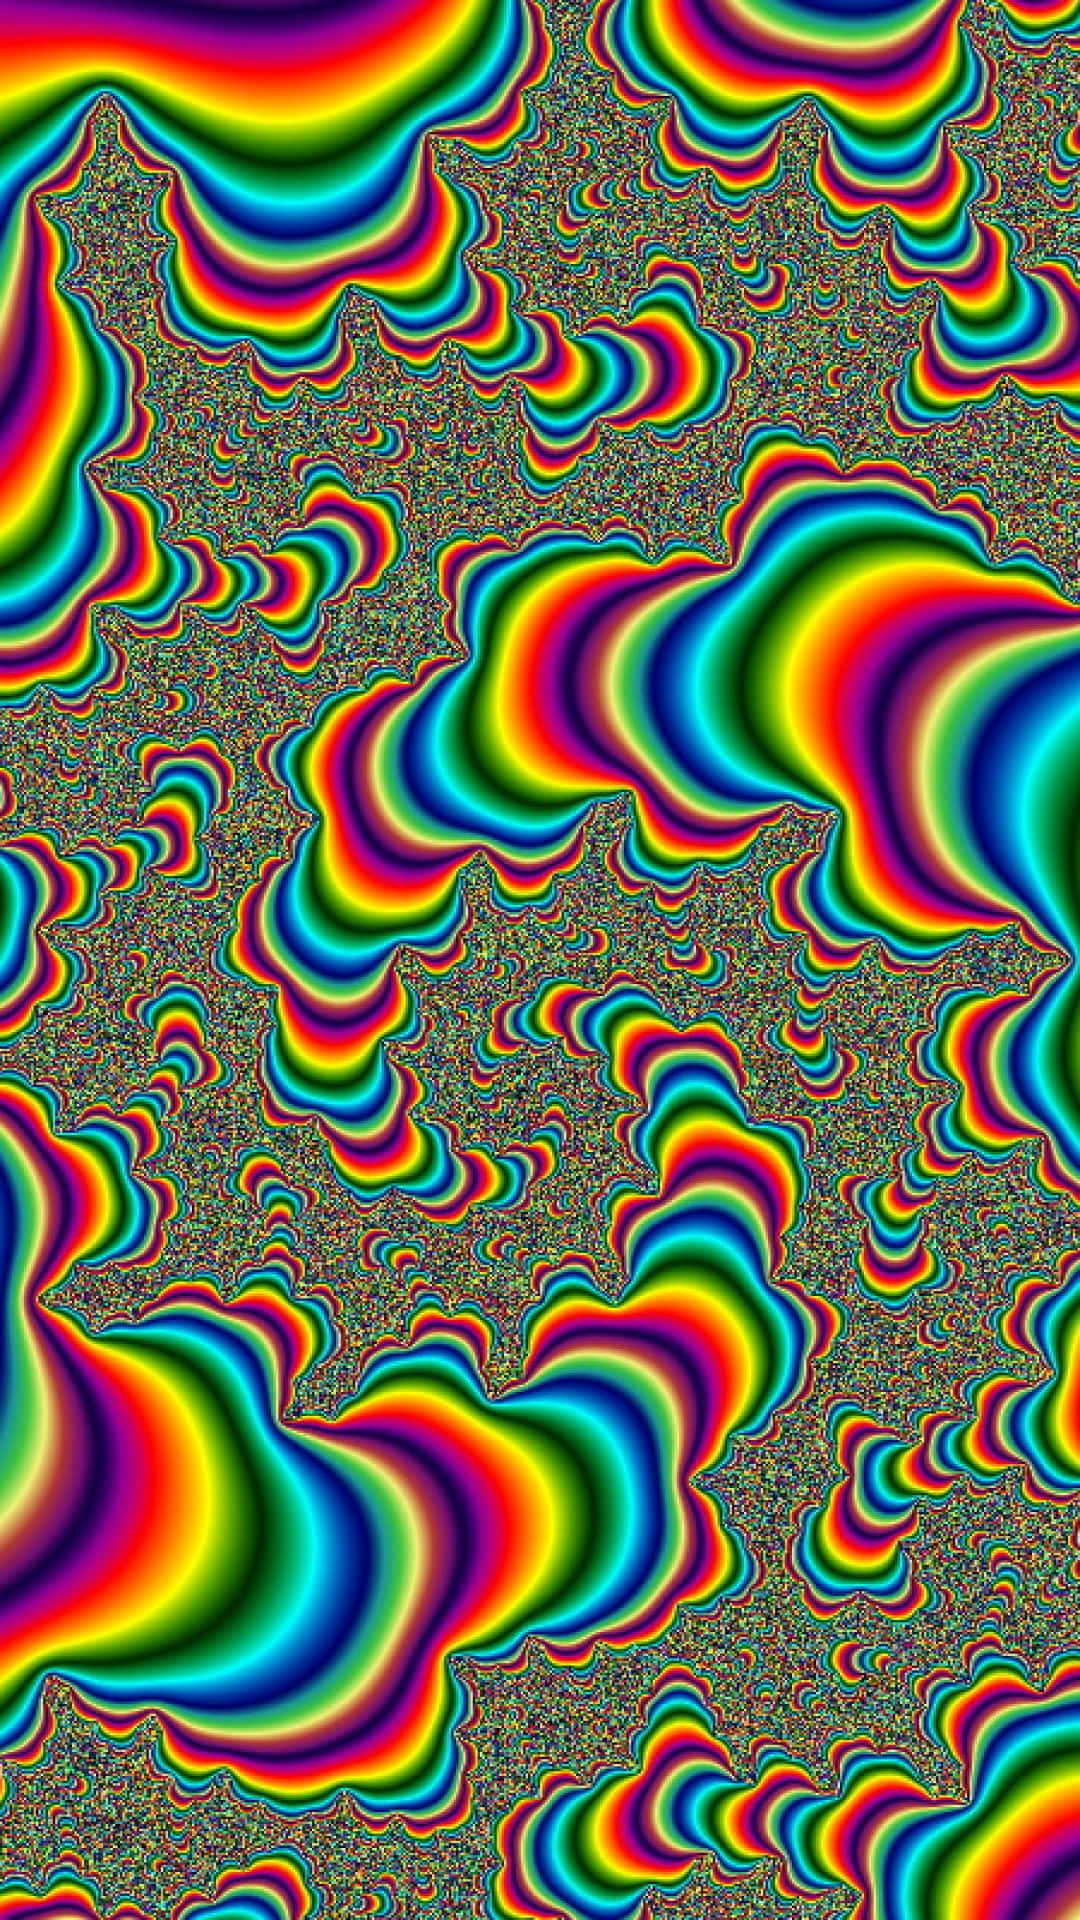 [300+] Trippy Backgrounds | Wallpapers.com